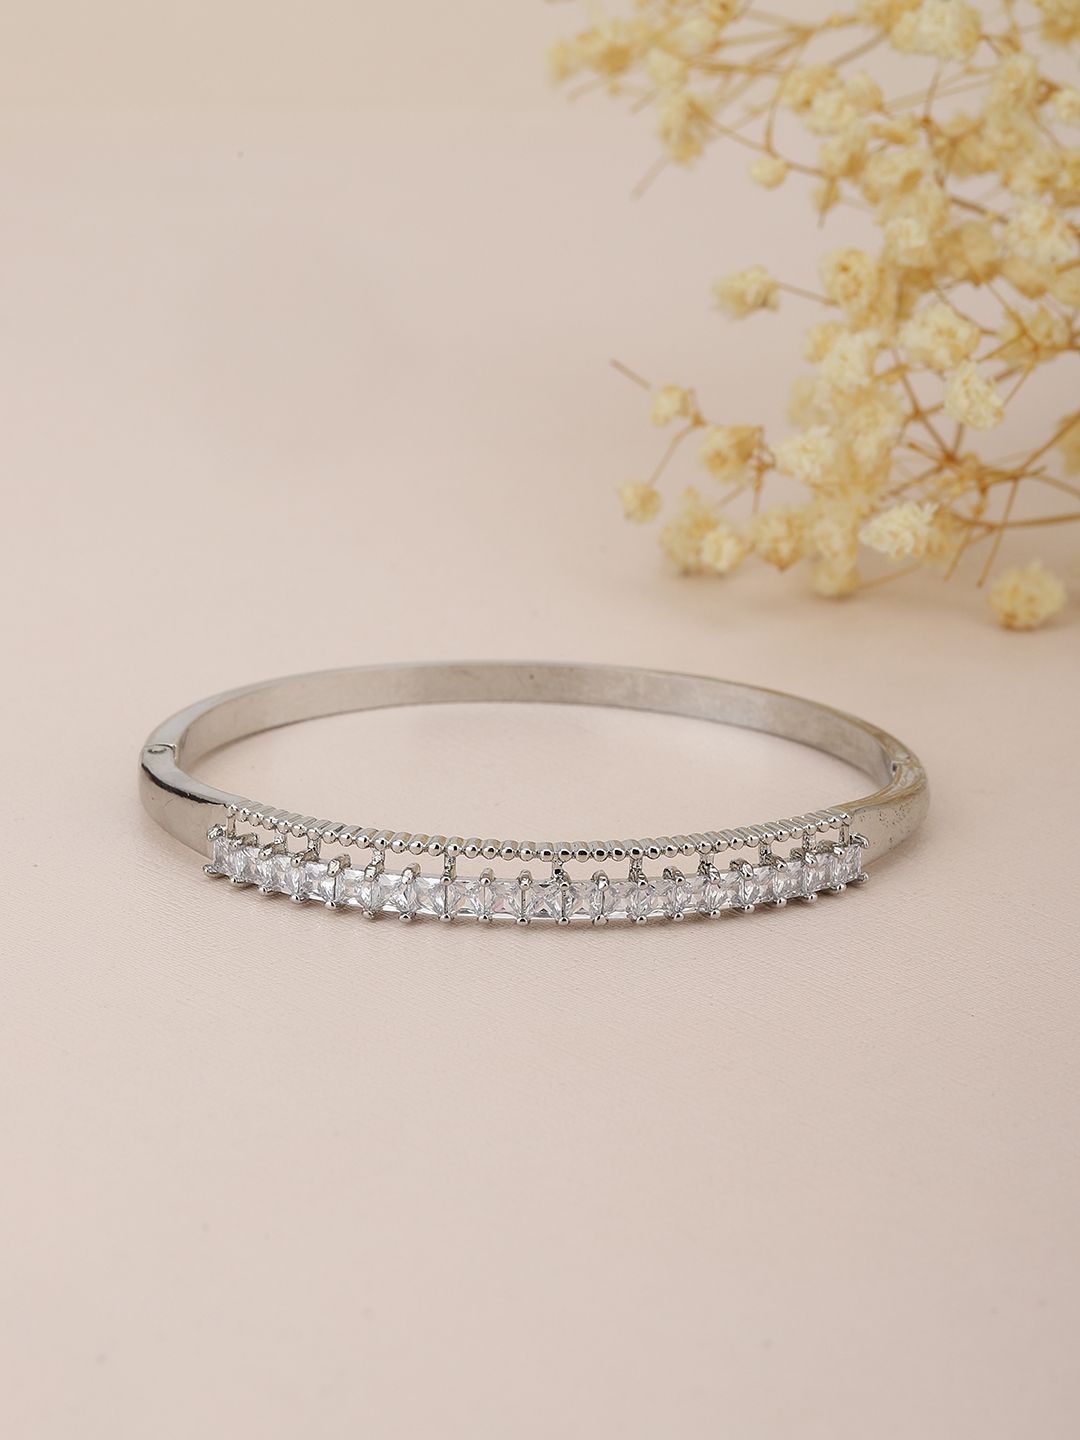 Carlton London Silver-Toned CZ-Studded Rhodium-Plated Handcrafted Cuff Bracelet Price in India